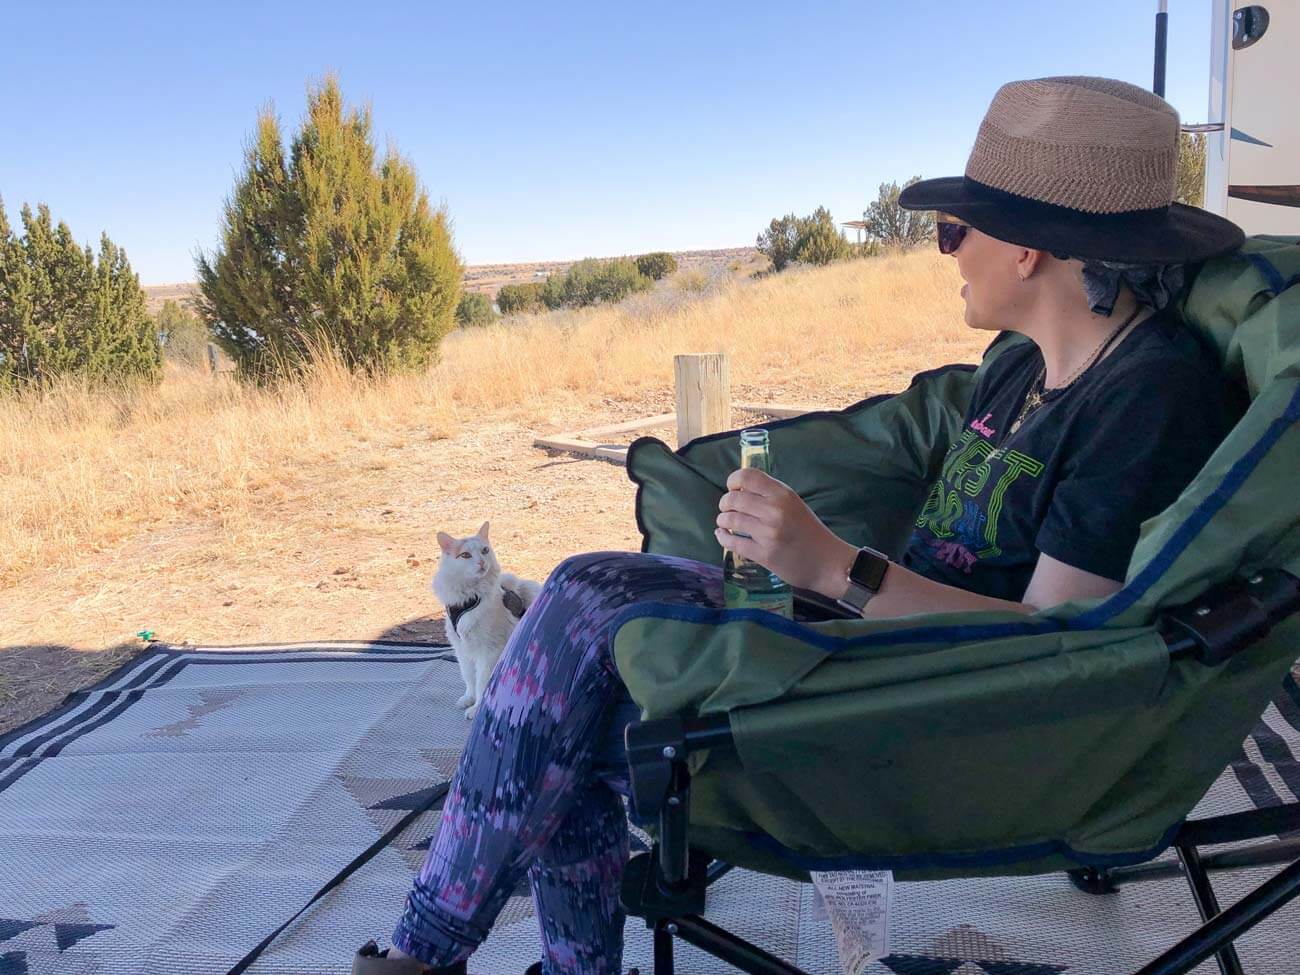 Woman sitting in camping chair outside at RV campground hanging out with cat.